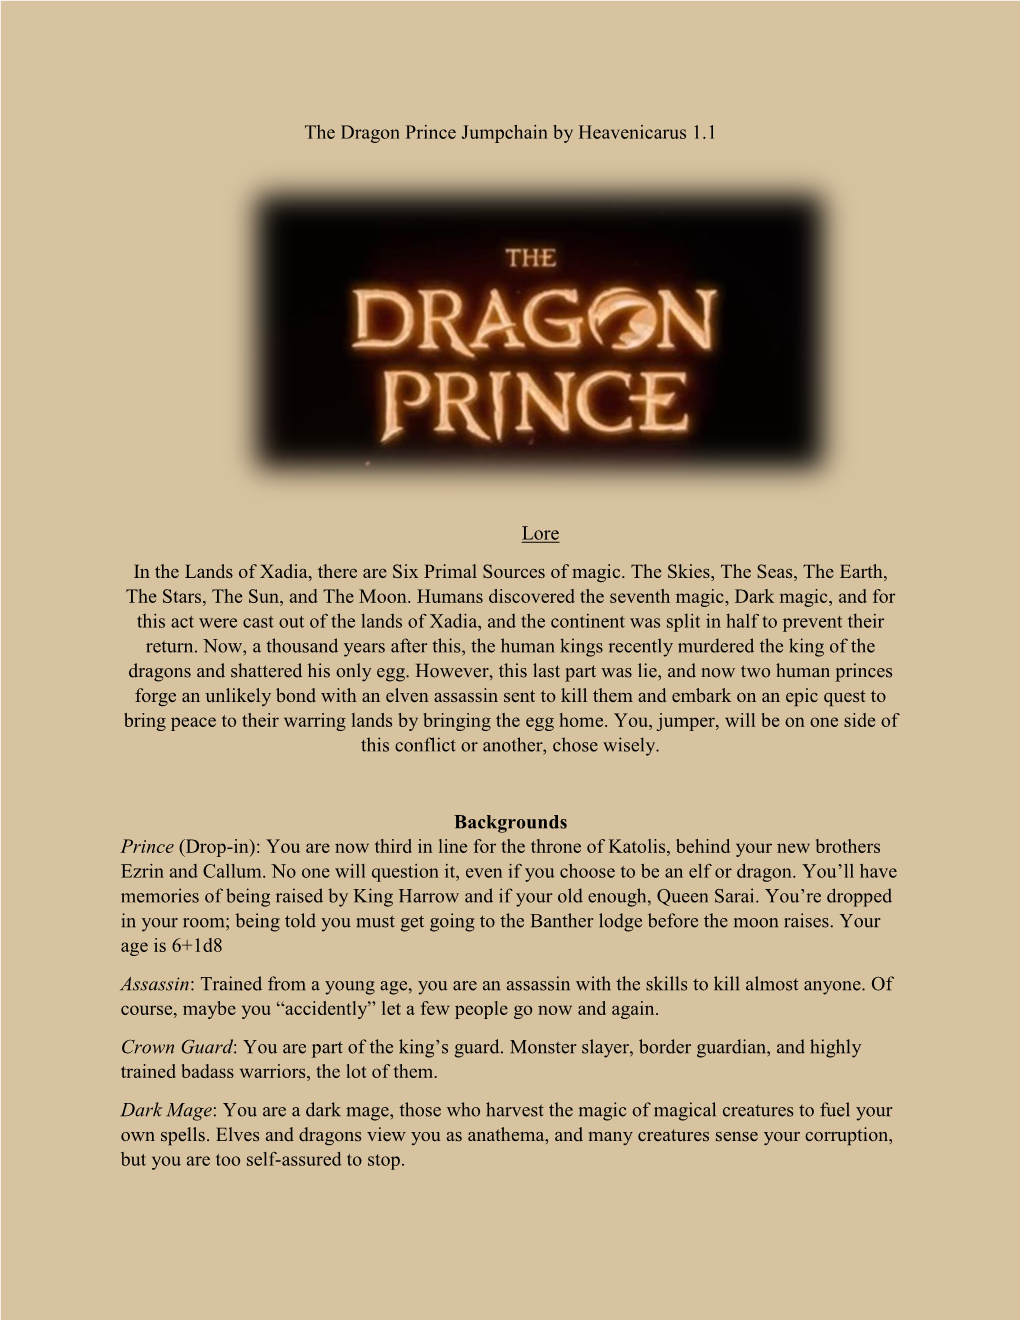 The Dragon Prince Jumpchain by Heavenicarus 1.1 Lore in the Lands